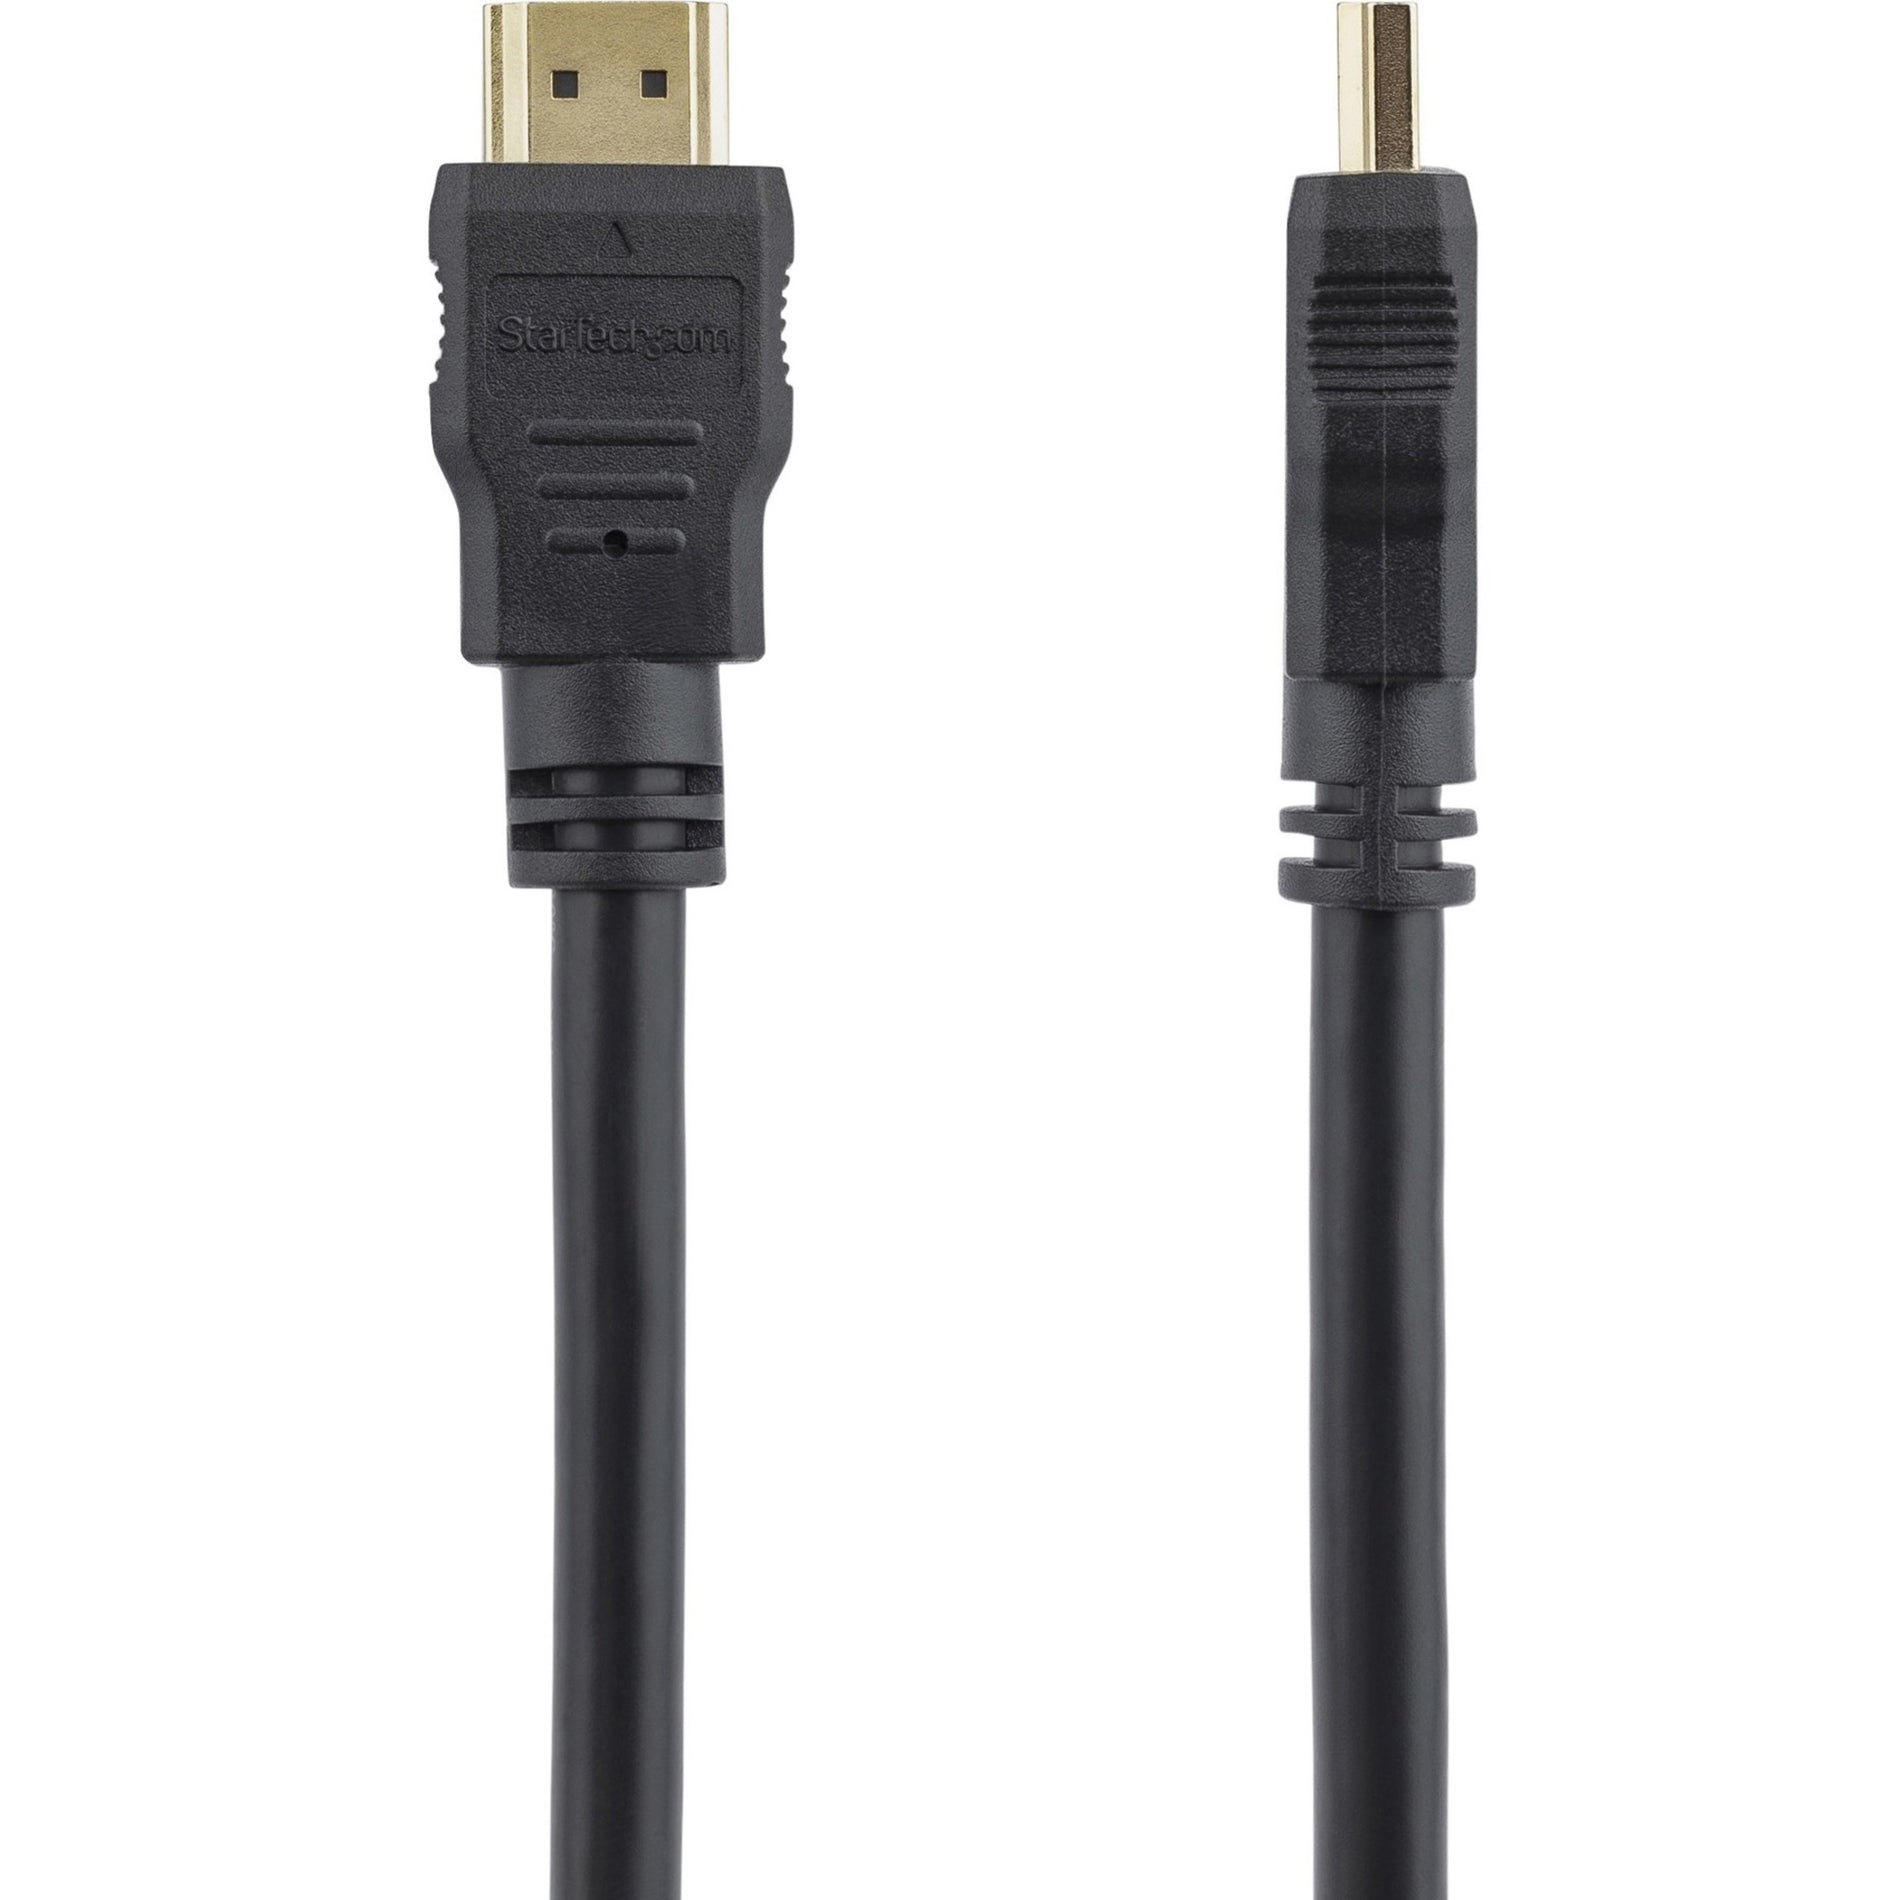 StarTech.com HDMM50CM 0.5m High Speed HDMI Cable - Ultra HD 4k x 2k HDMI Cable, Strain Relief, Corrosion Resistant, Molded, Gold Plated Connectors